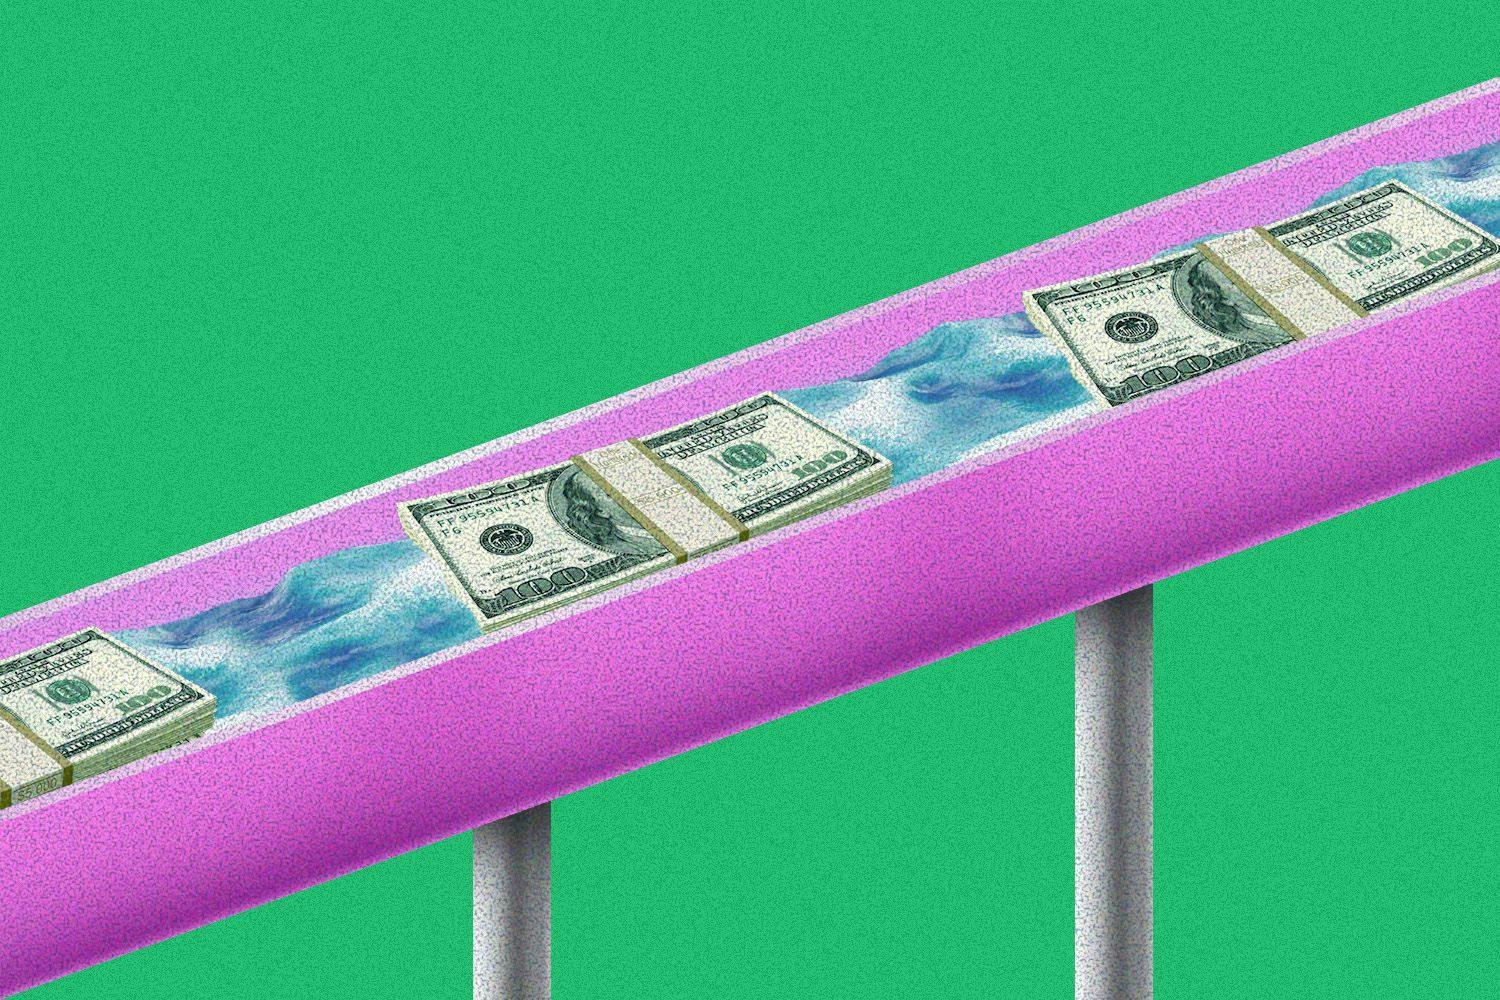 A pink water slide with stacks of hundred dollar bills sliding down it on a green background